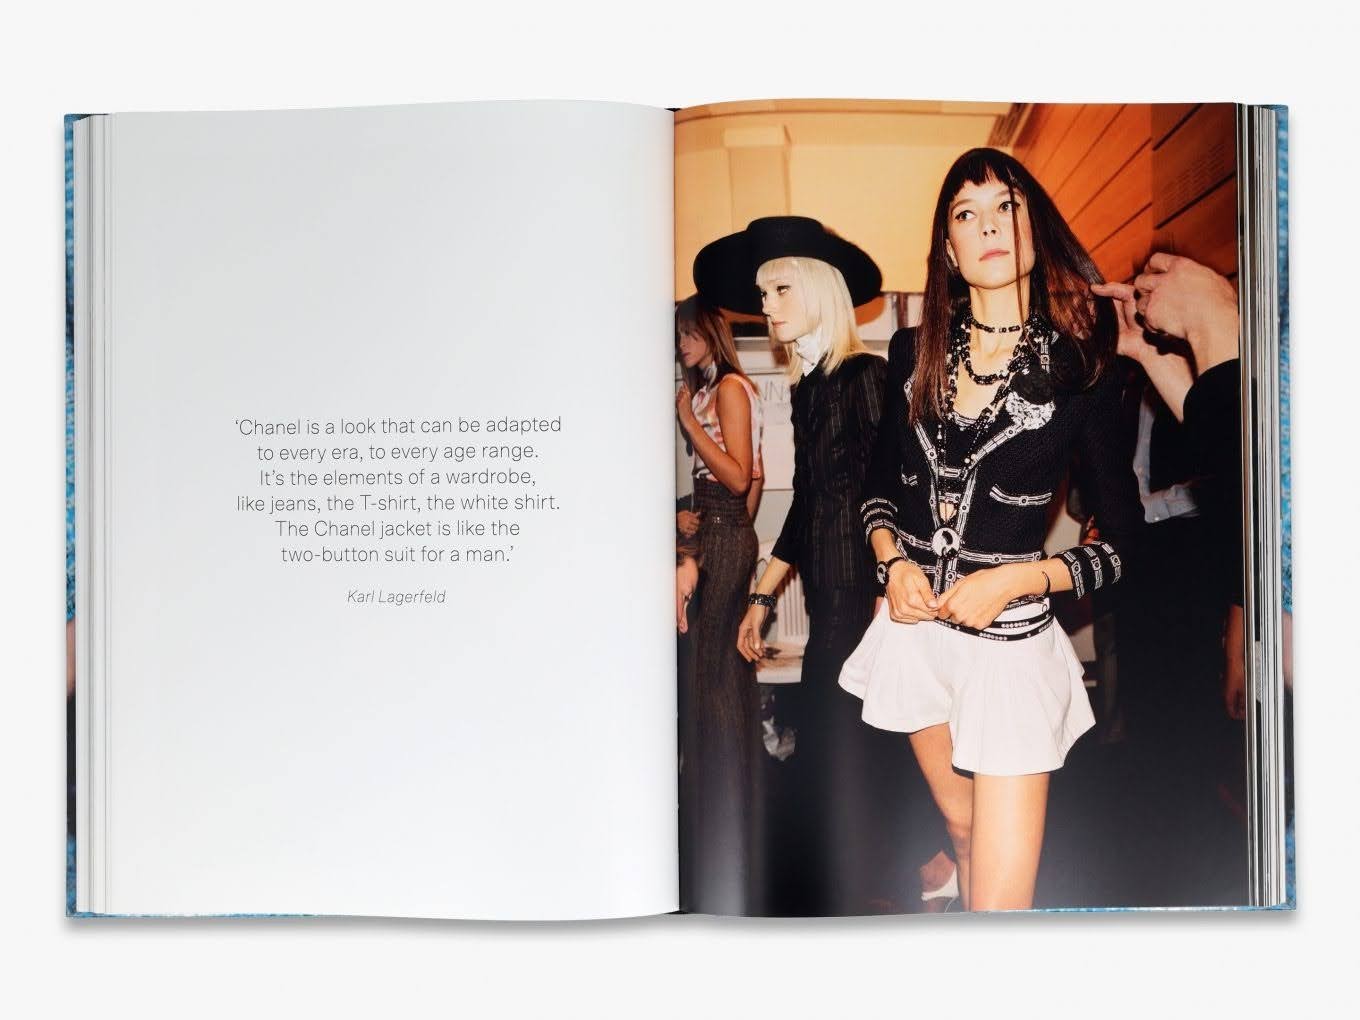 New Photo Book Captures Energy, Elegance of Karl Lagerfeld's Shows